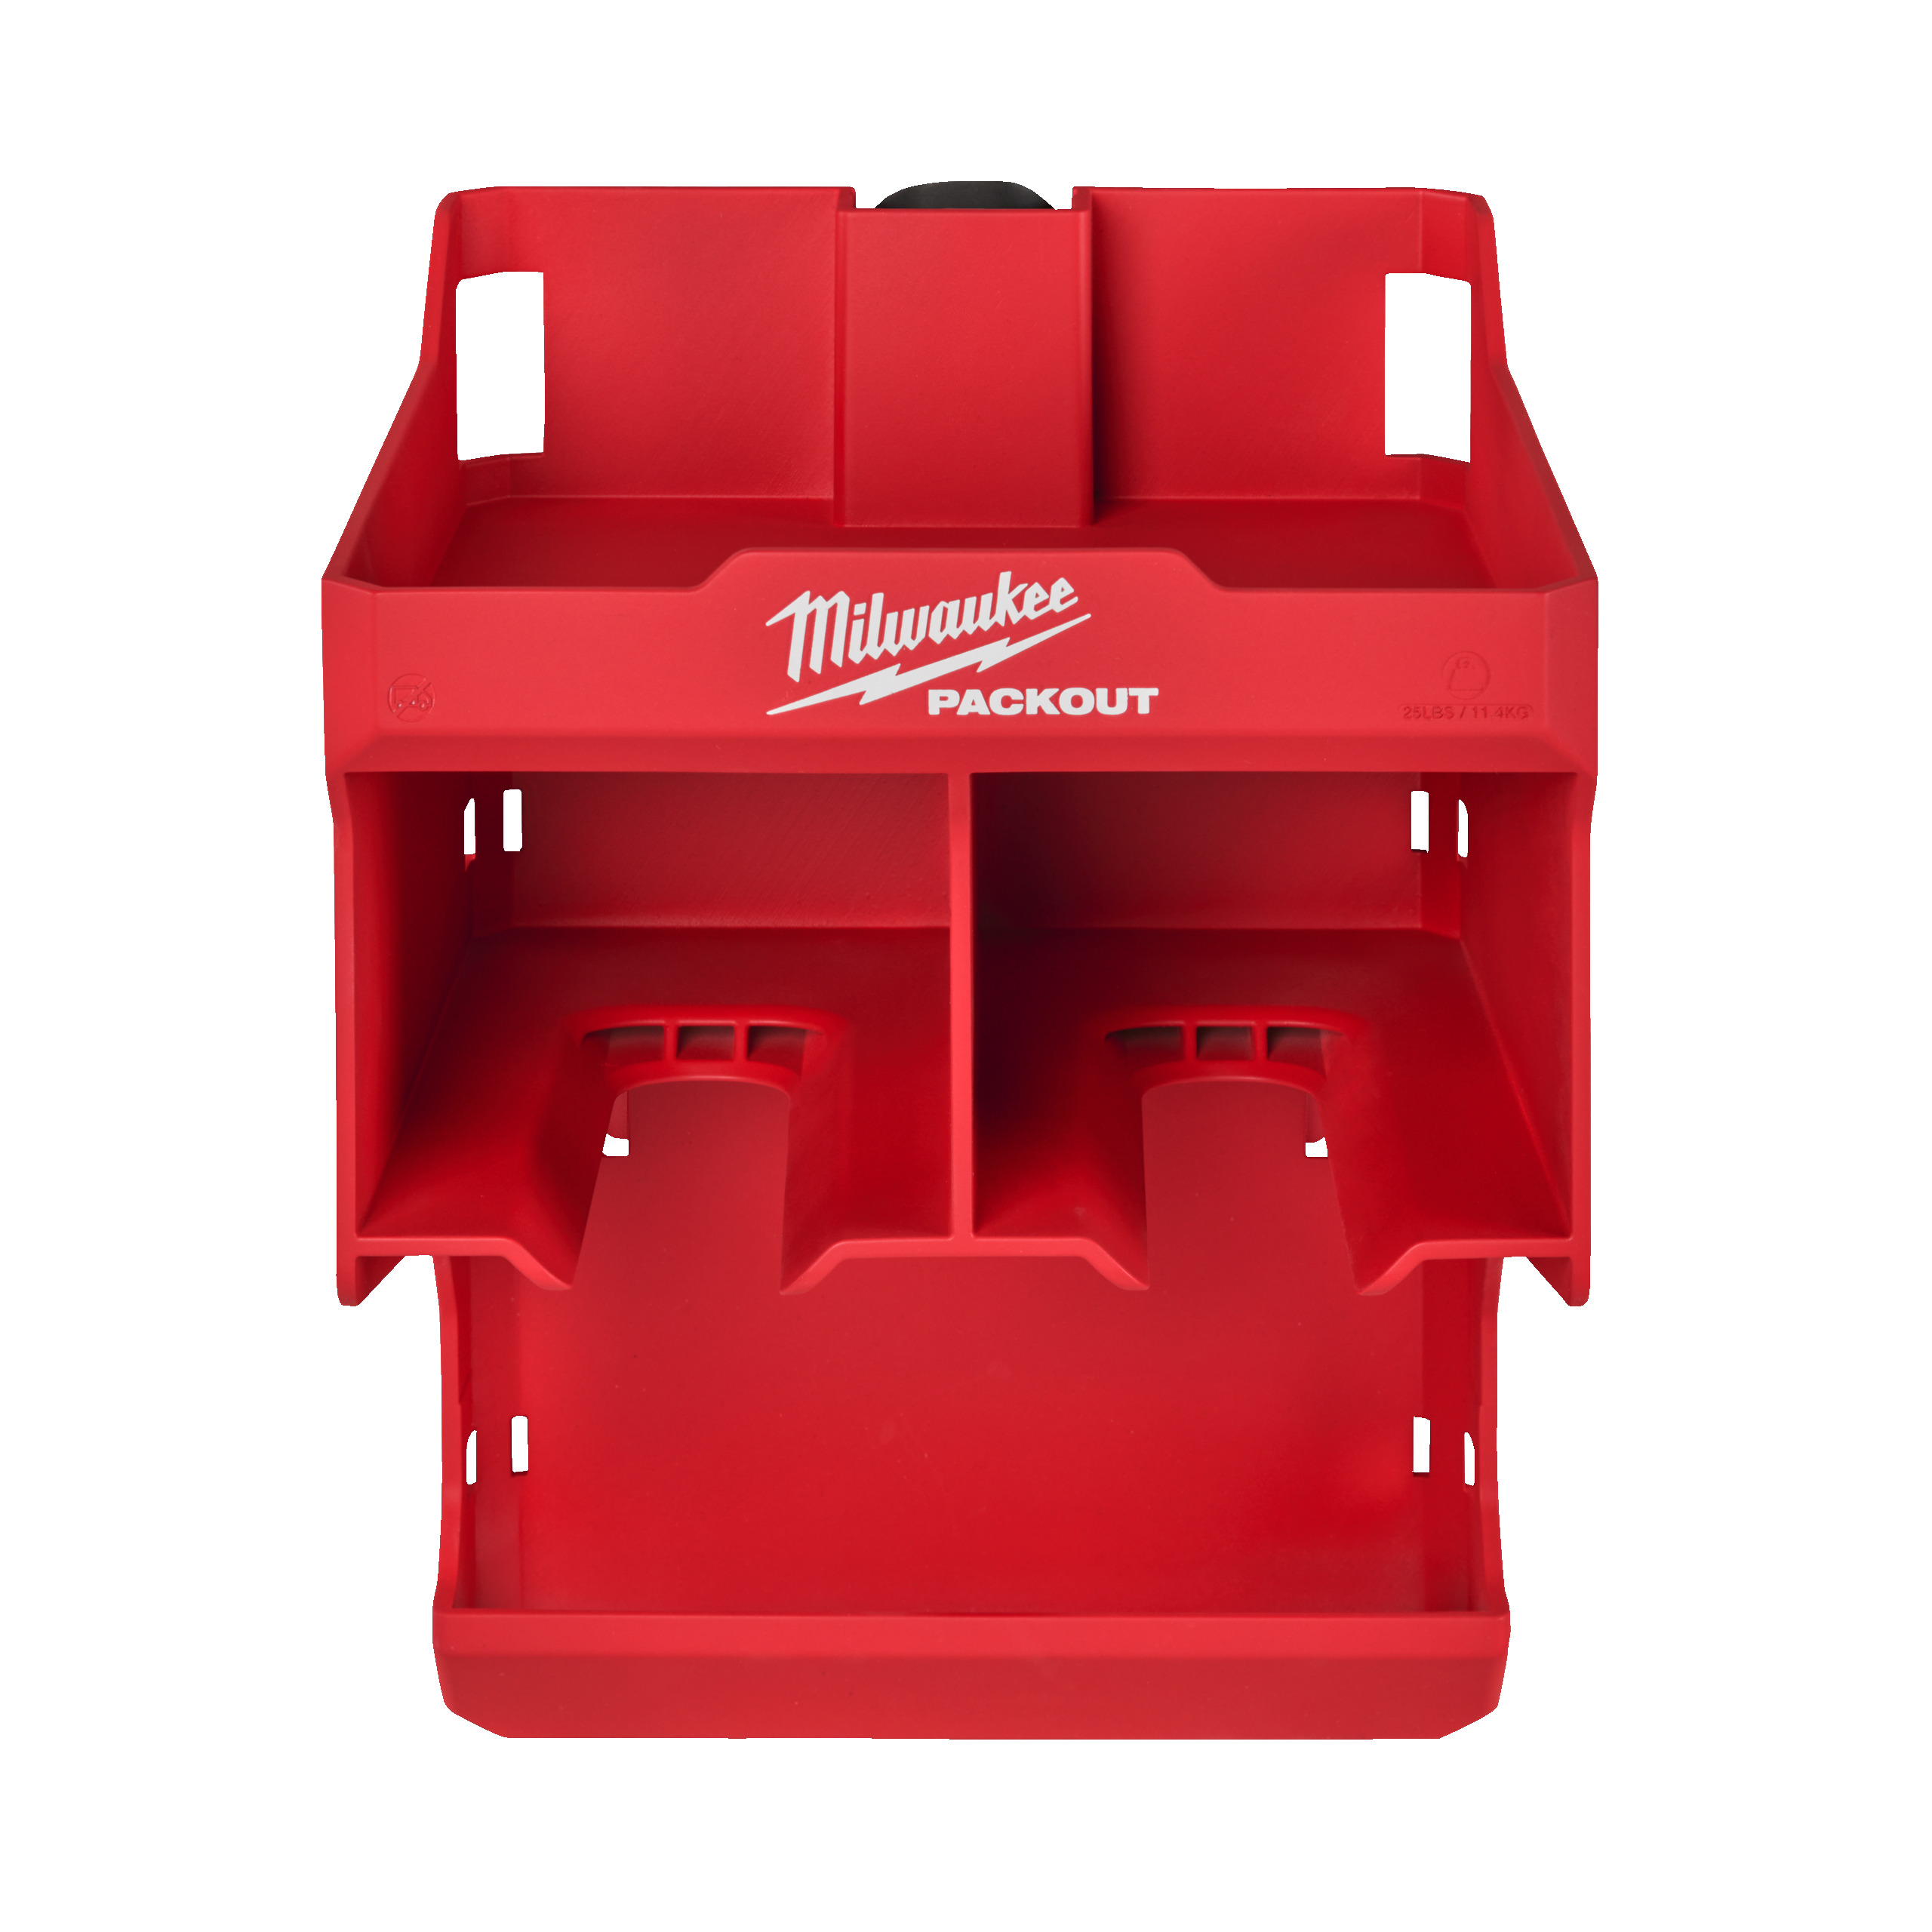 Milwaukee Packout Drill Storage Station 4932480712